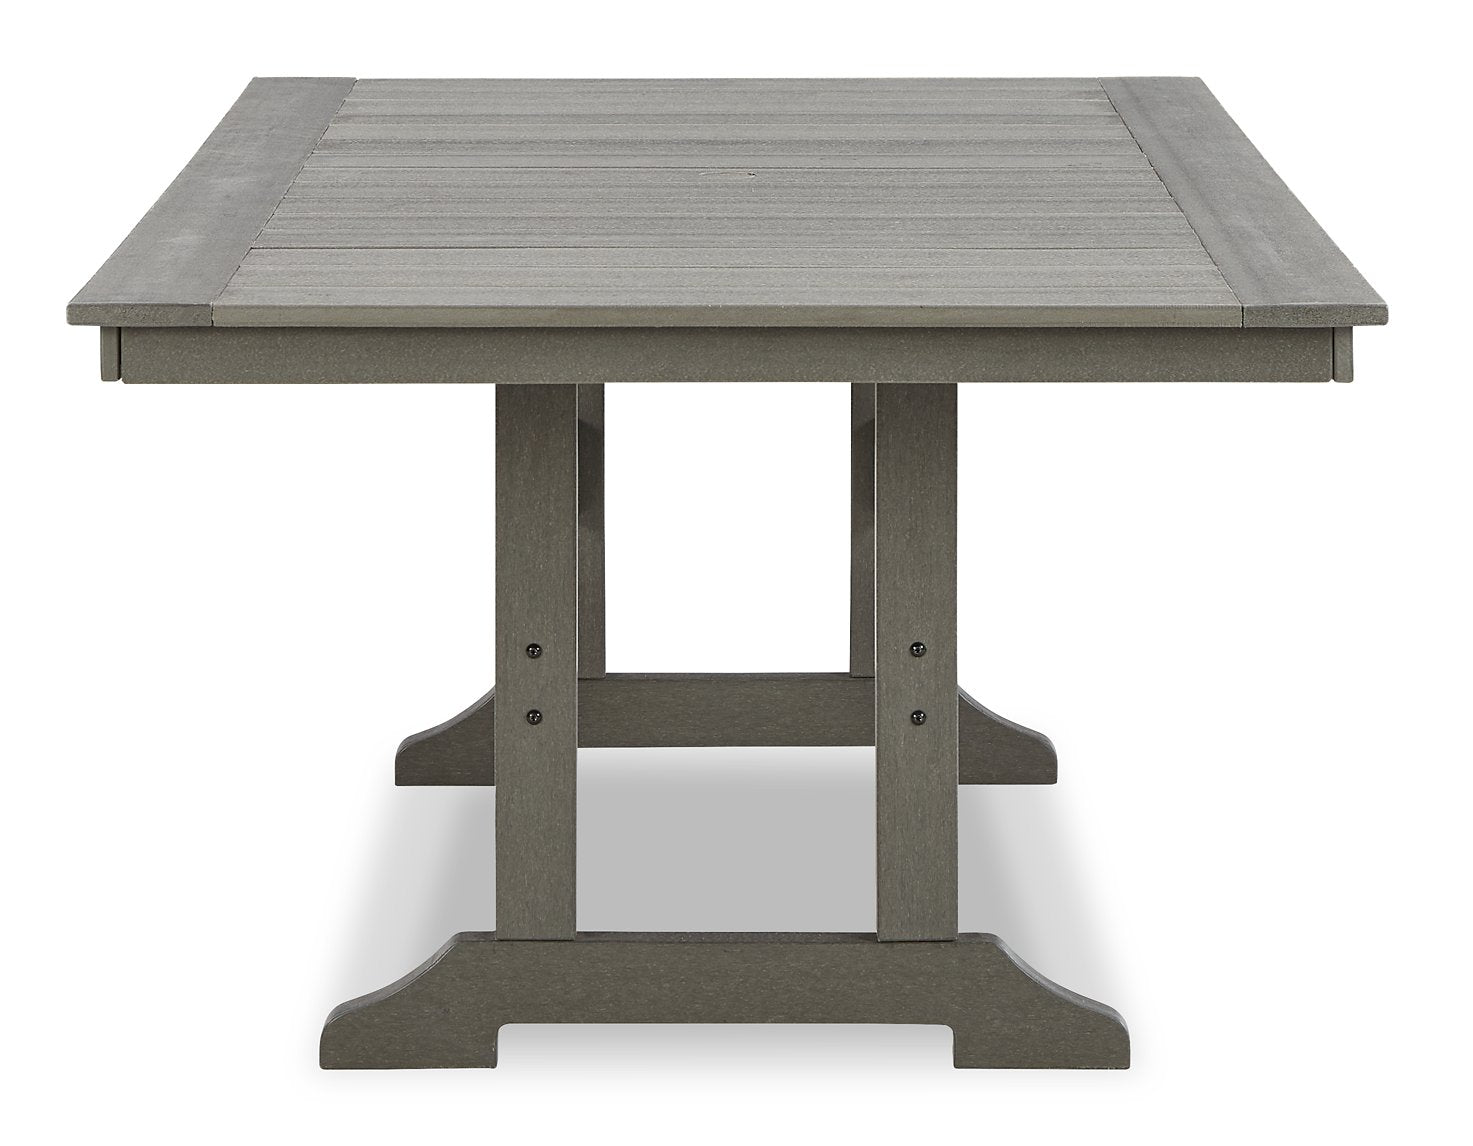 Visola Outdoor Dining Table with 4 Chairs - Half Price Furniture